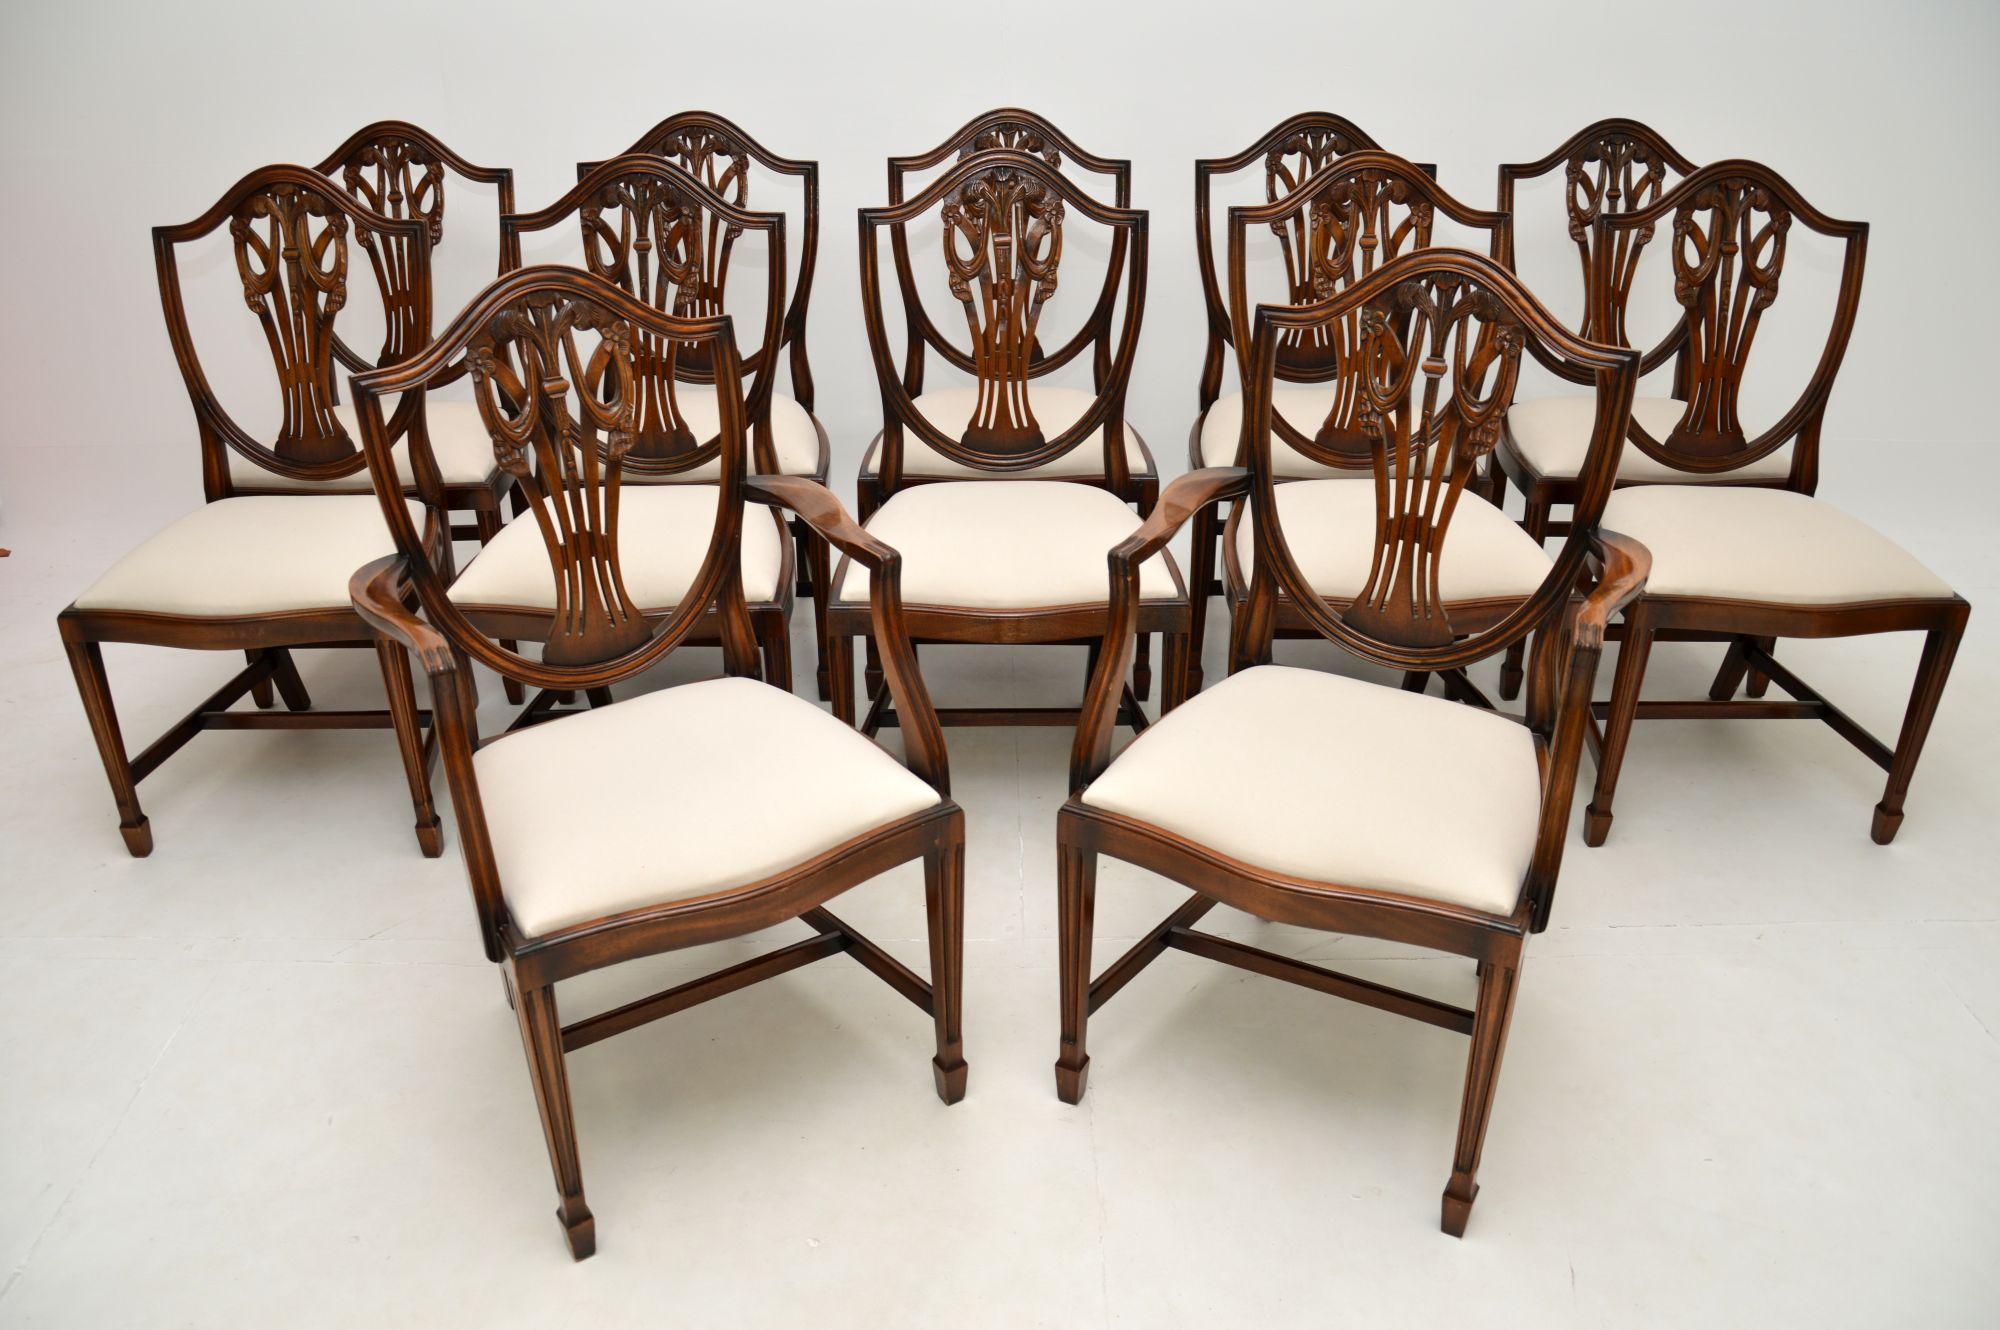 A fantastic set of twelve antique shield back dining chairs. They were made in England, and date from around the 1950’s.

The quality is outstanding, the pierced shield backs have intricate Prince of Wales feather carving, they have serpentine